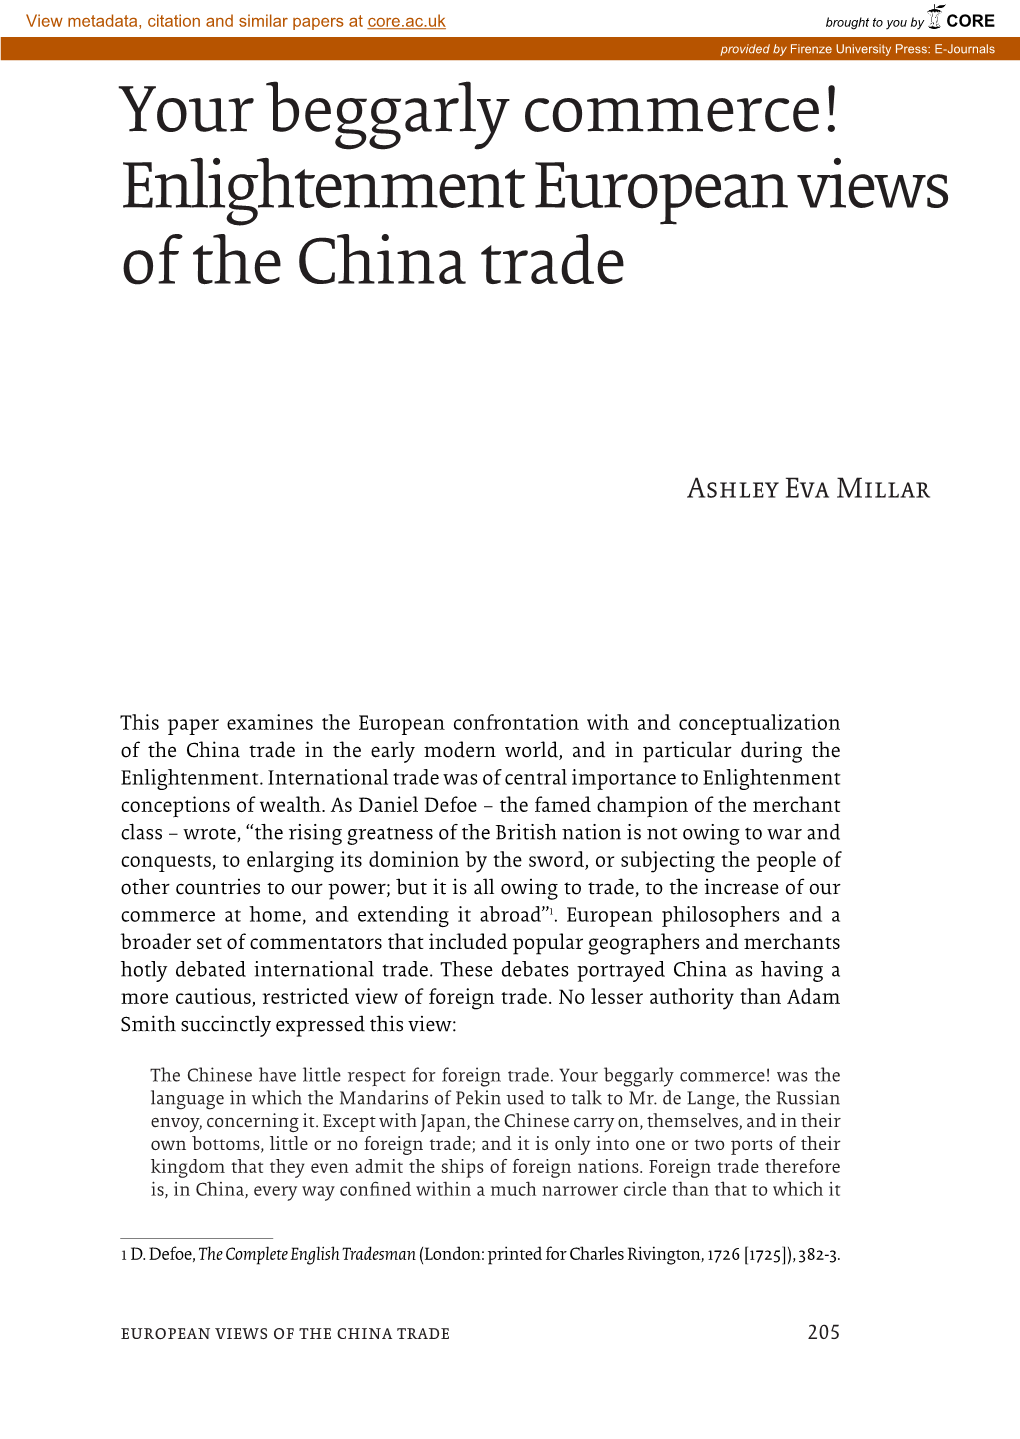 Enlightenment European Views of the China Trade